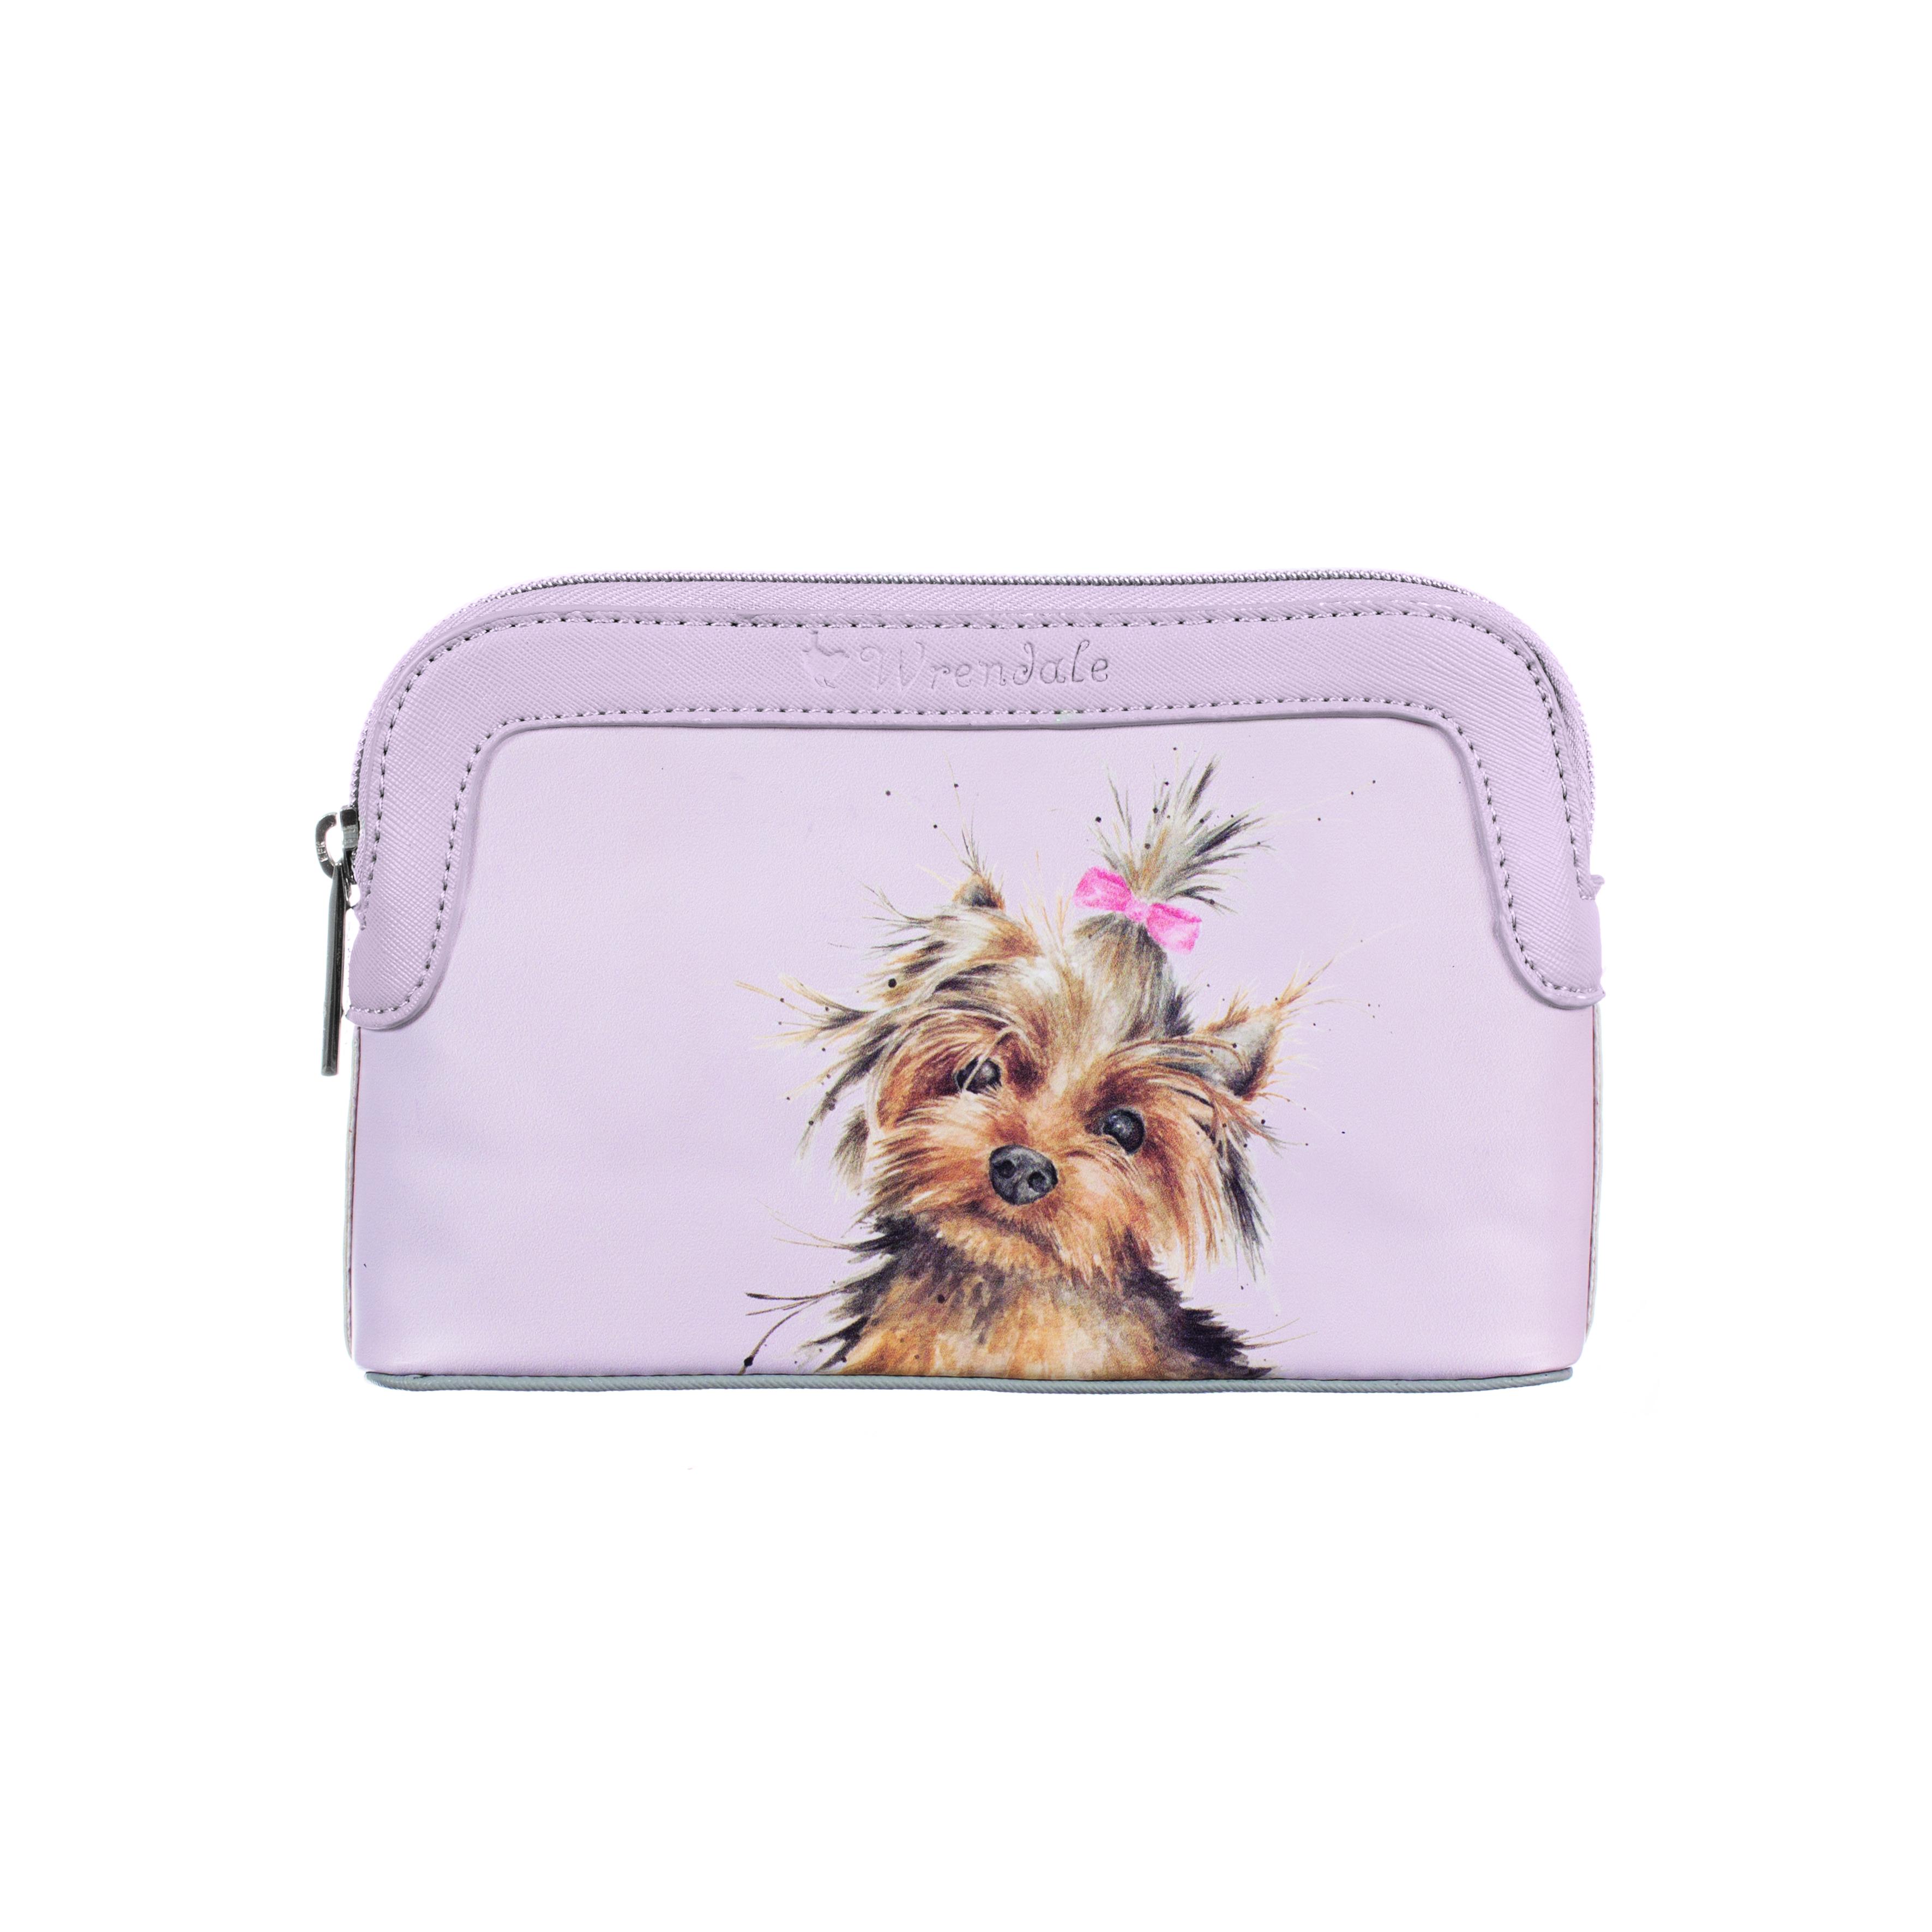 WRENDALE COSMETIC BAG SMALL - DOG FRONT